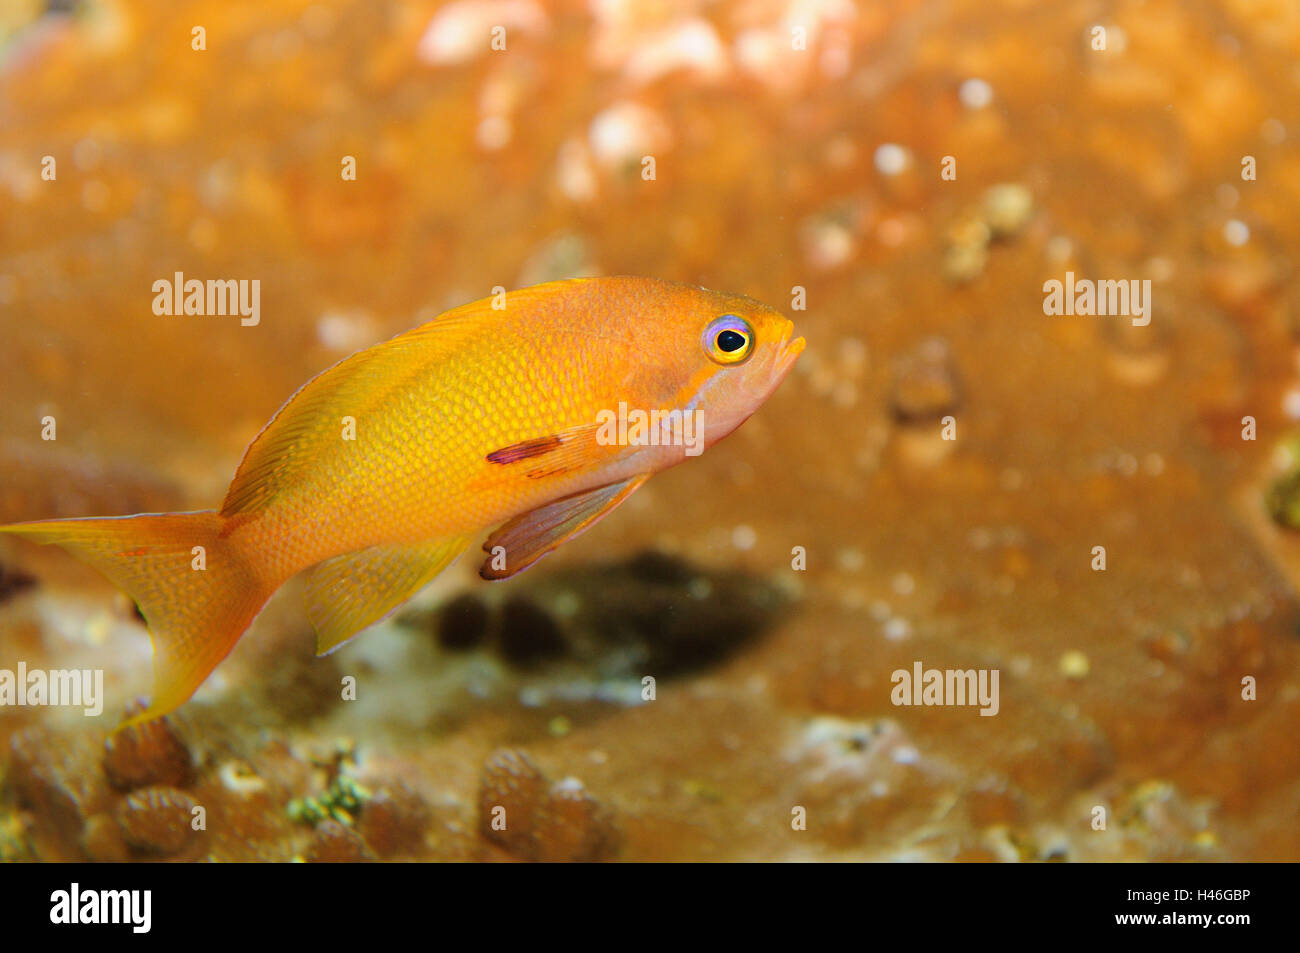 Daffodil cichlid, neolamprologus daffodil, underwater, side view, swimming, Stock Photo